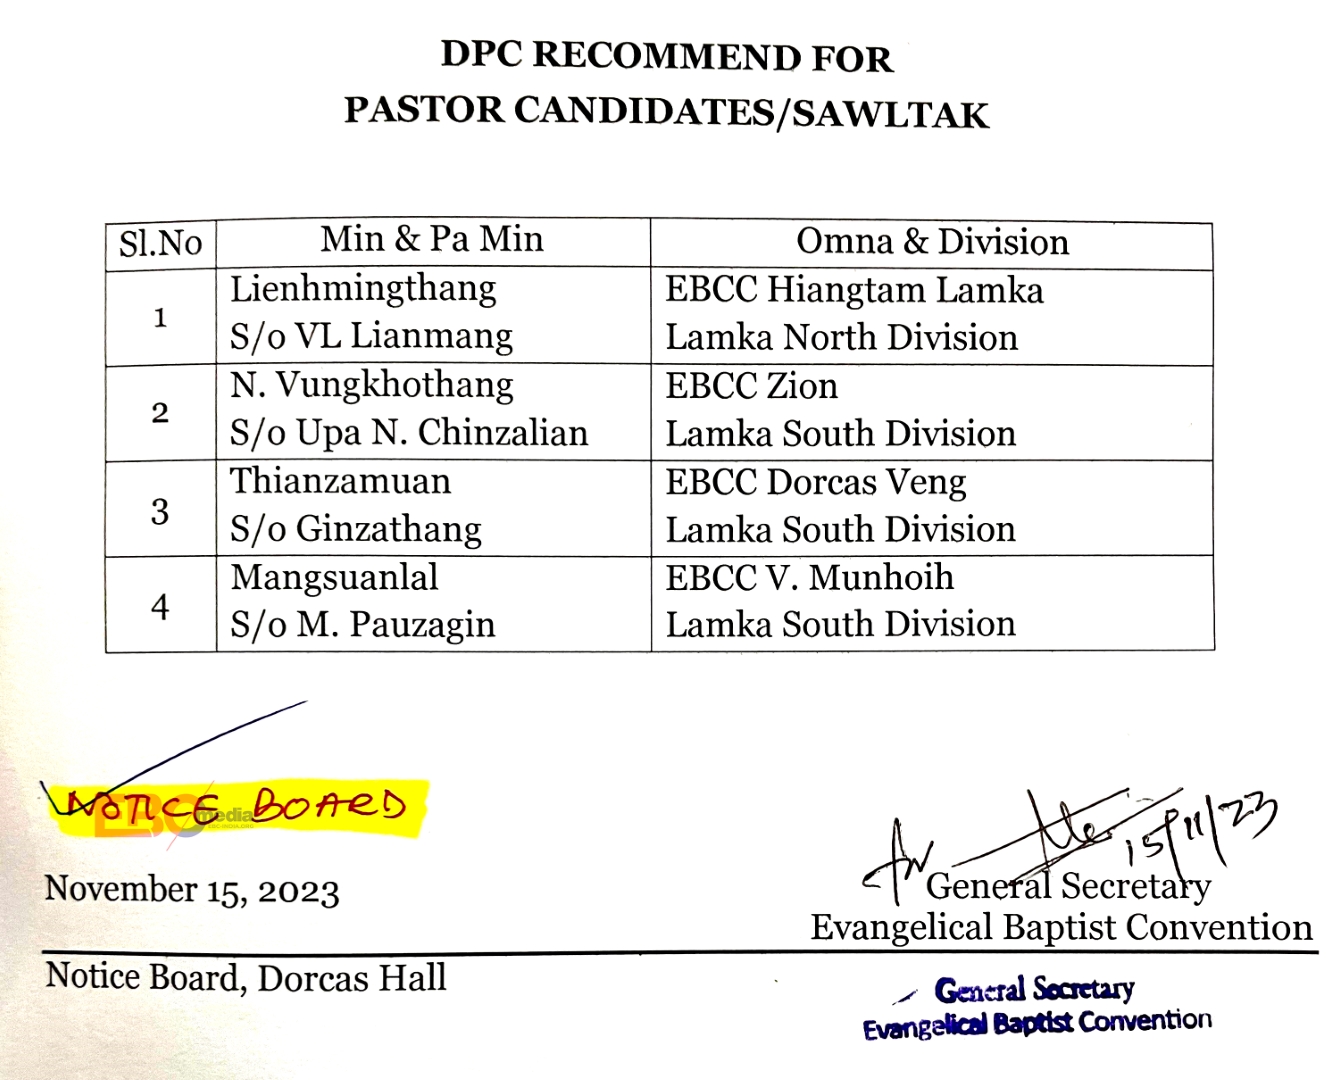 DPC RECOMMENDED PASTOR CANDIDATES SAWLTAK